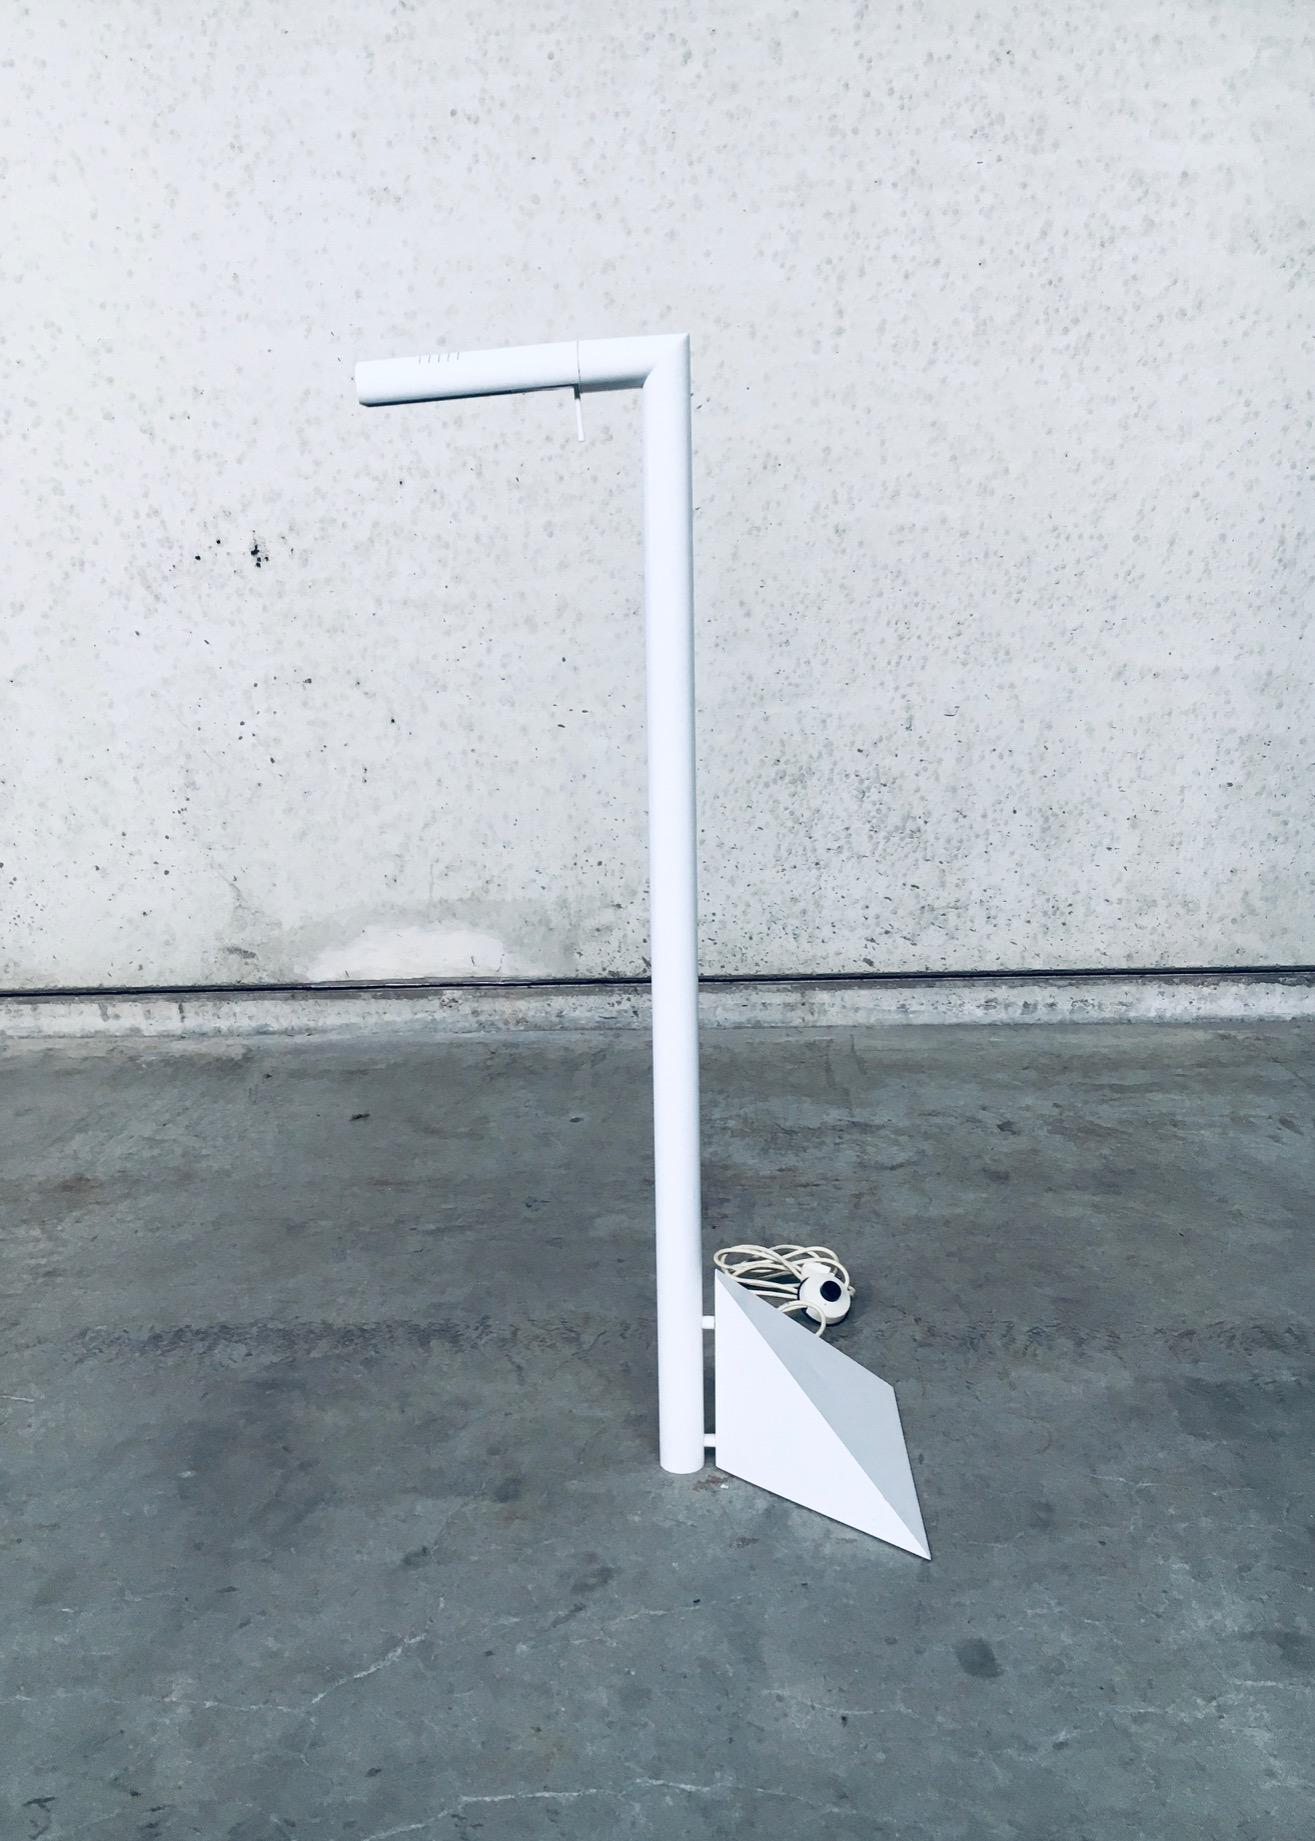 Vintage Postmodern Design Floor Lamp, made in Italy 1980's. White laquered metal construction with adjustable light. In very good, all original condition. Architectural in design. The light can be turned up, down or sideways. Measures 50cm x 109cm x